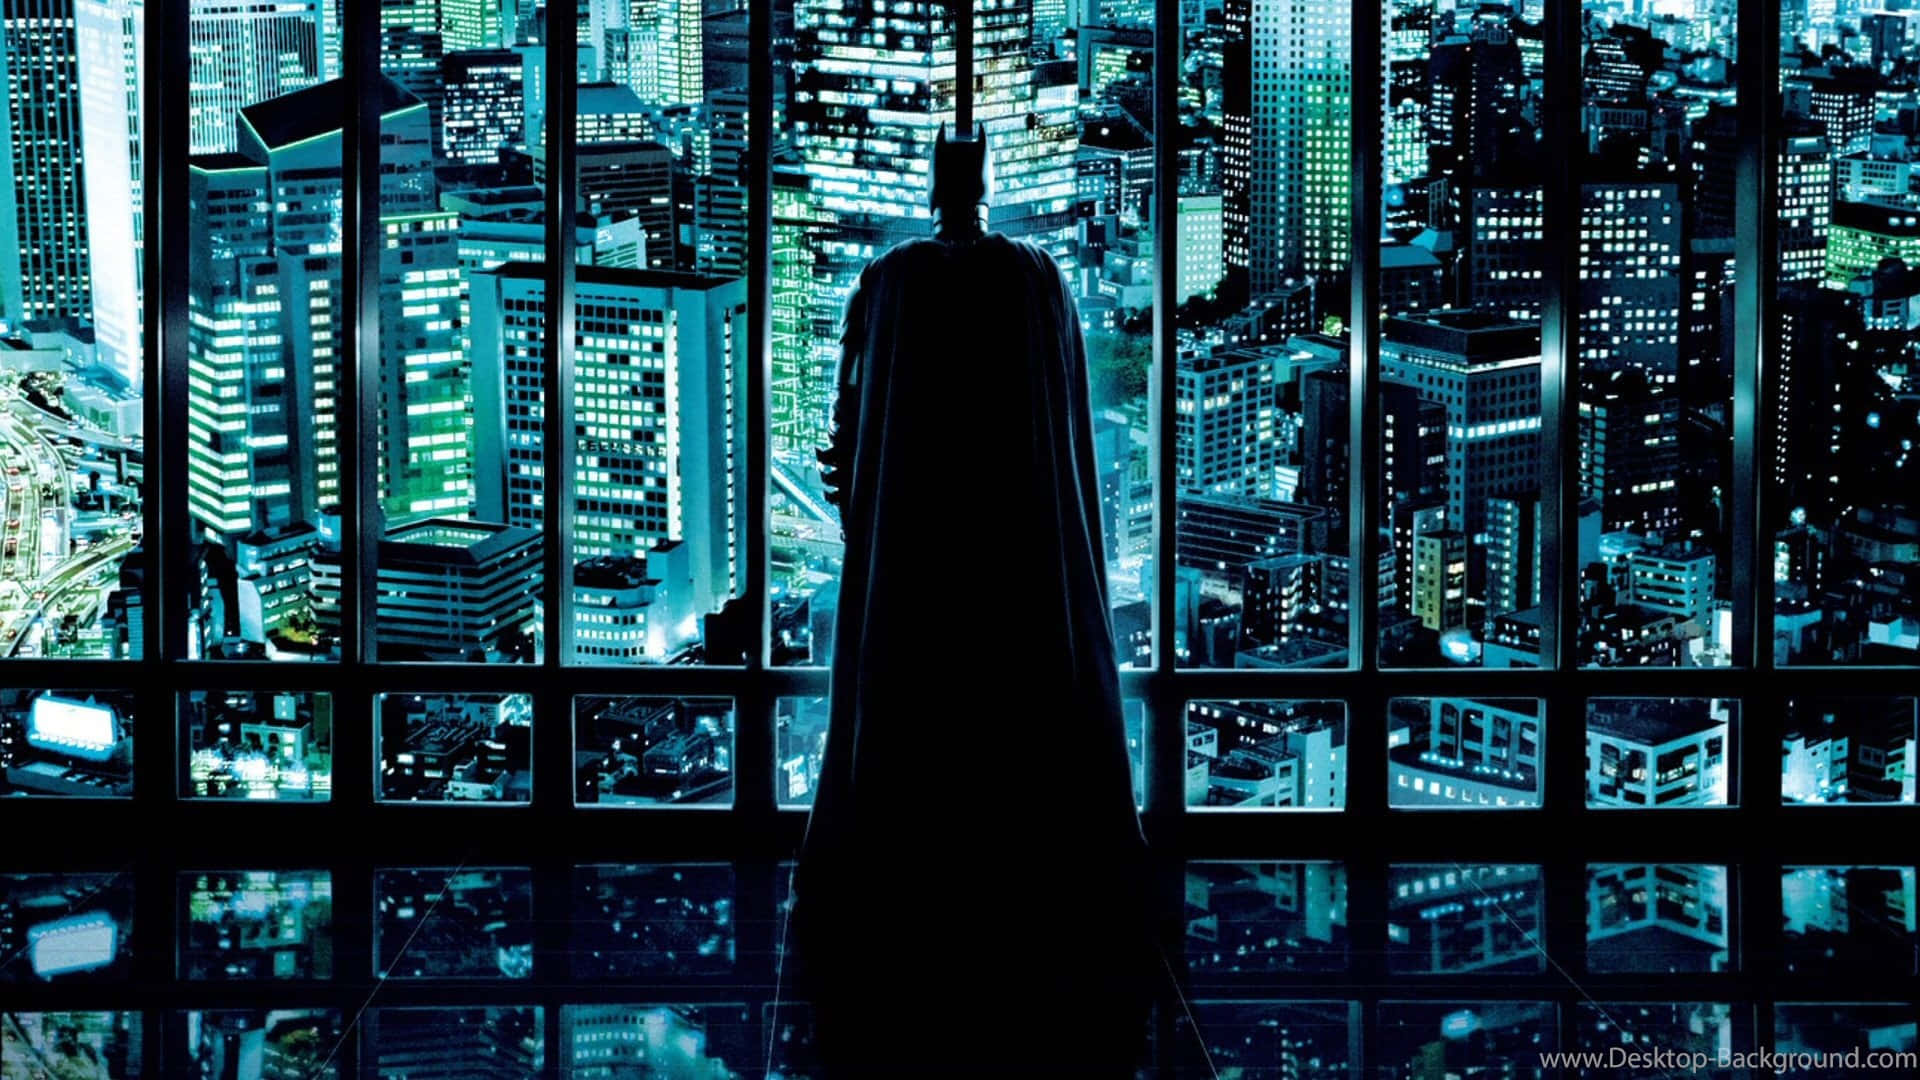 Get ready for adventure with Awesome Batman! Wallpaper